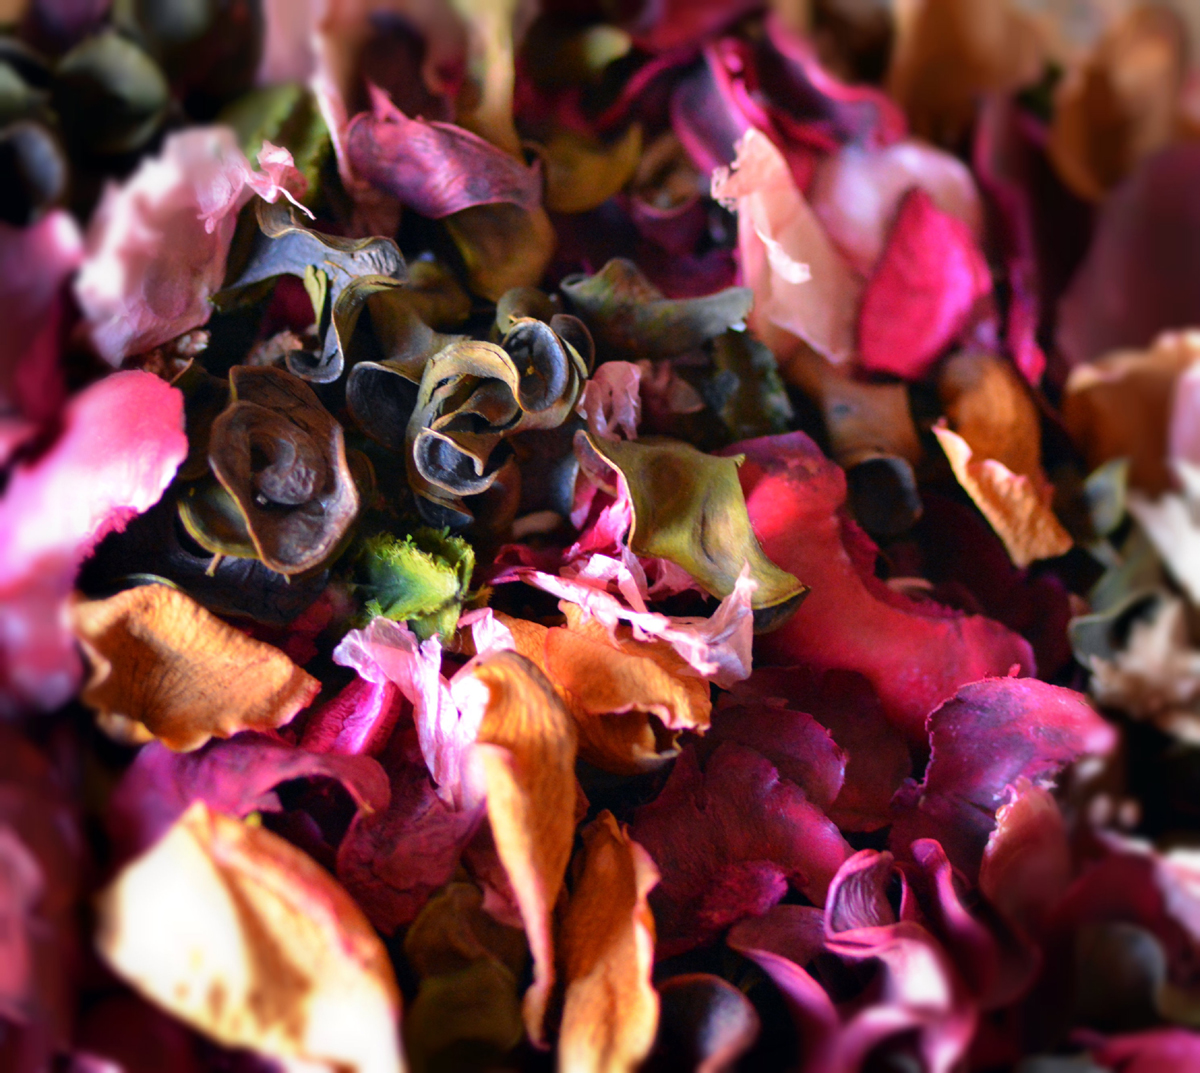 How to Make Potpourri - Instructions and Recipes